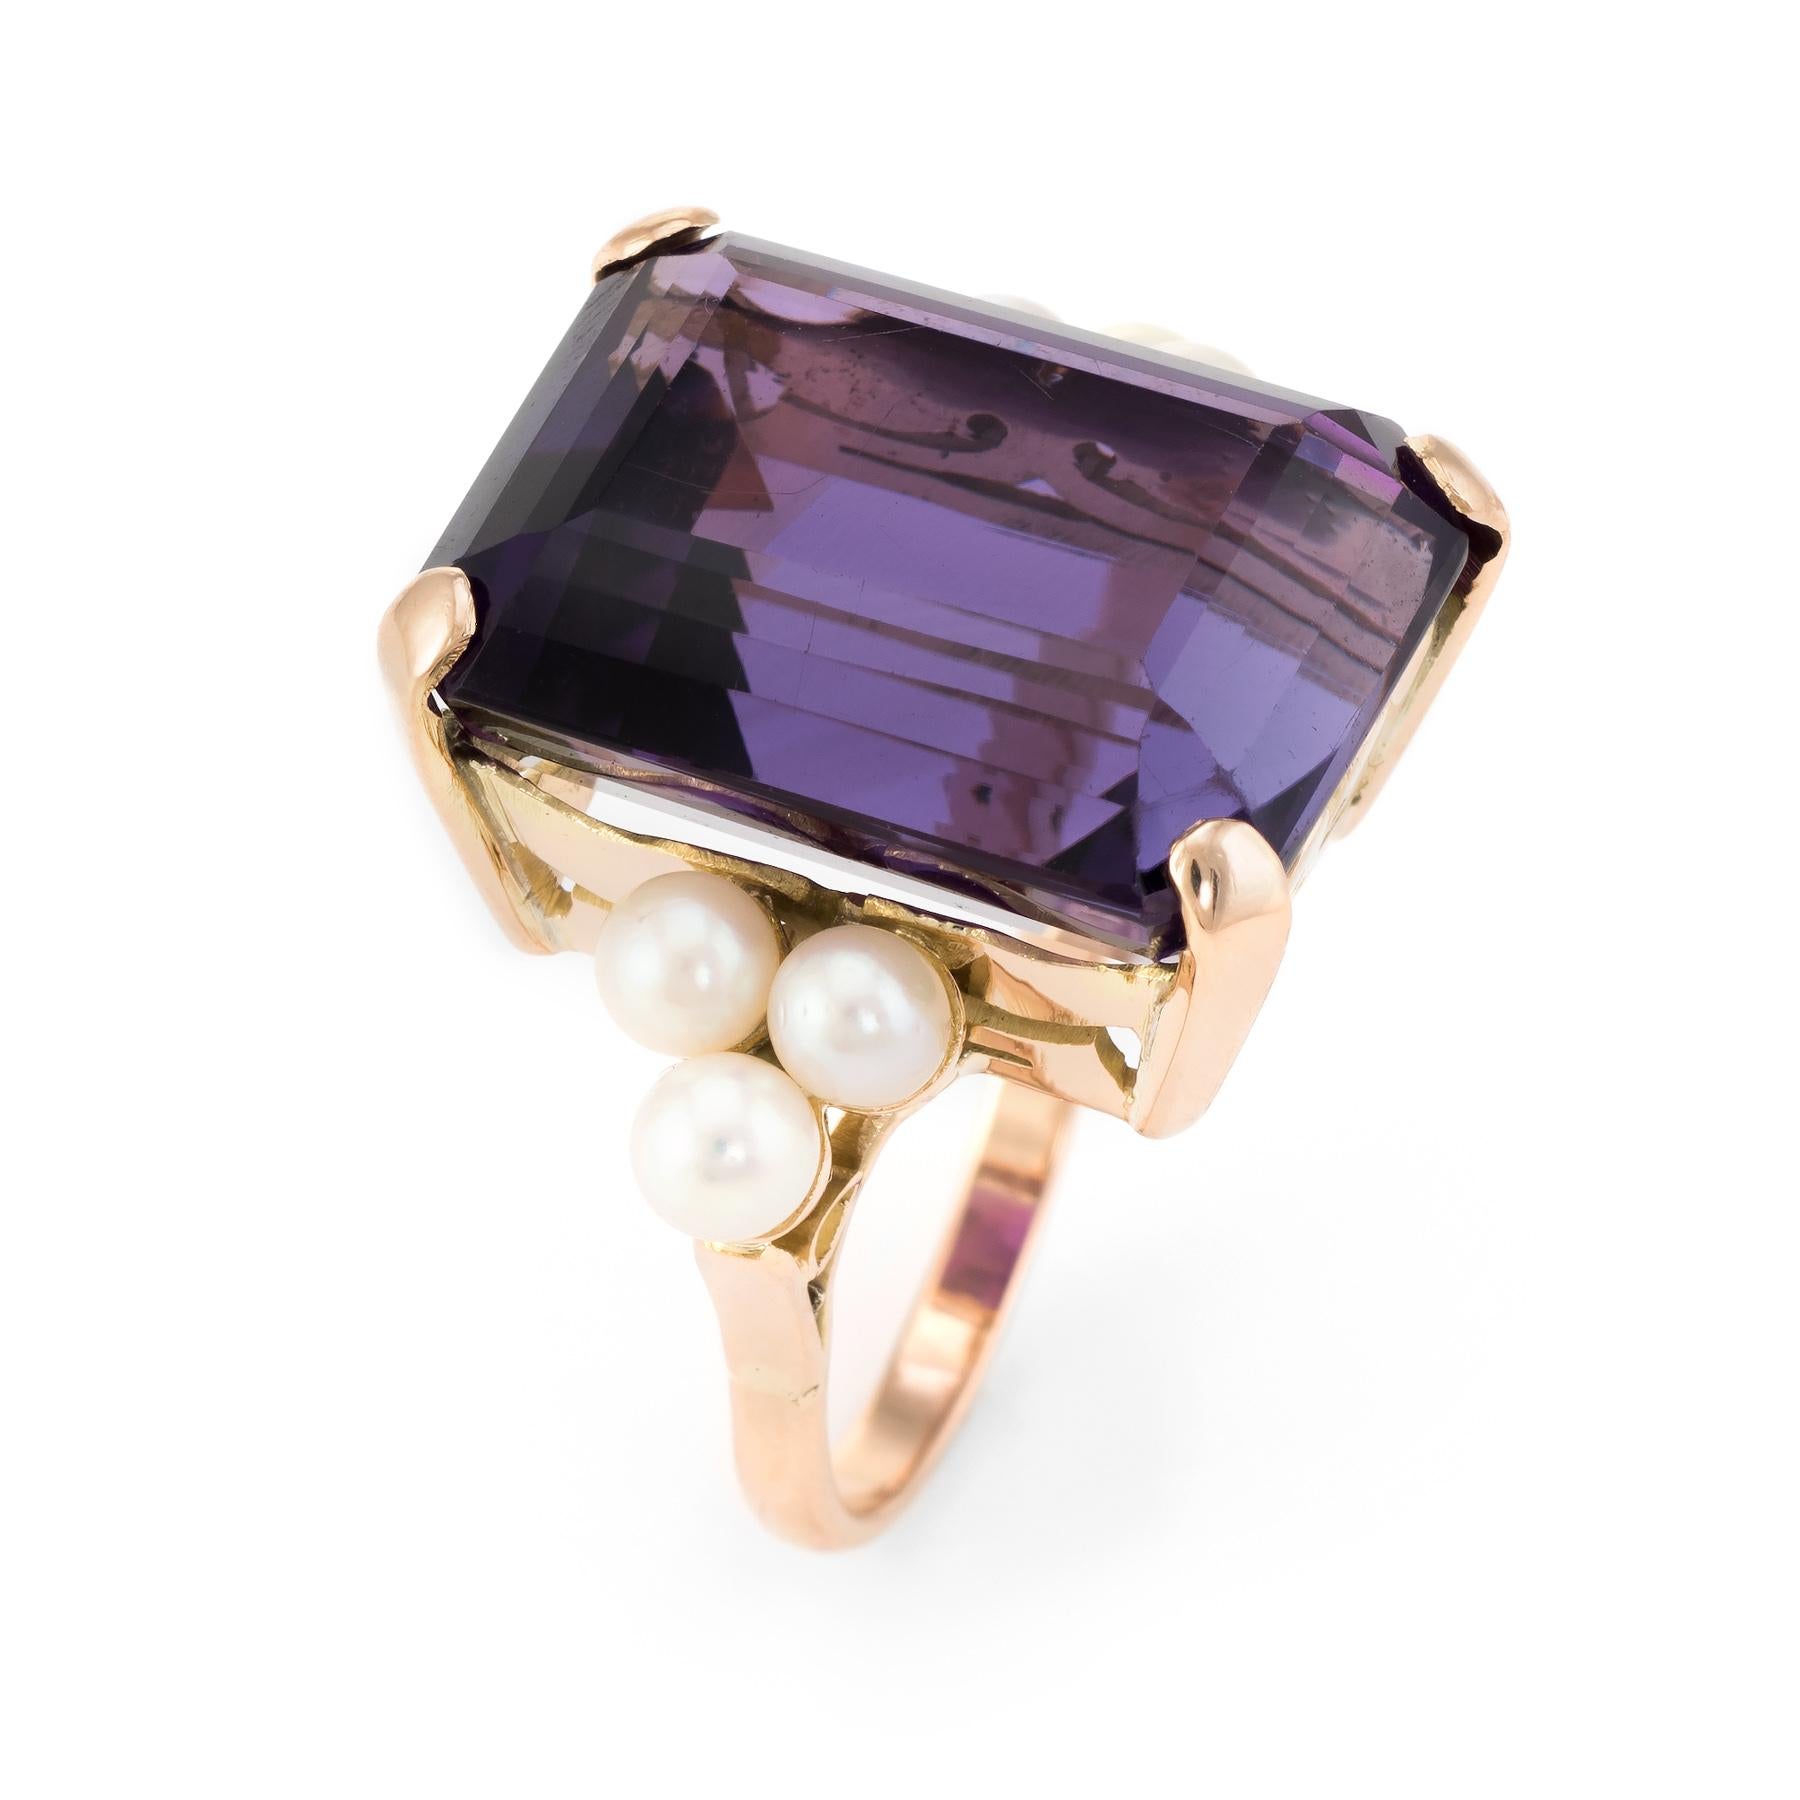 Elegant vintage cocktail ring (circa 1950s to 1960s), crafted in 14 karat rose gold. 

Centrally mounted emerald cut amethyst measures 20mm x 15mm (estimated at 25 carats), accented with six 4mm cultured pearls. The amethyst is in excellent